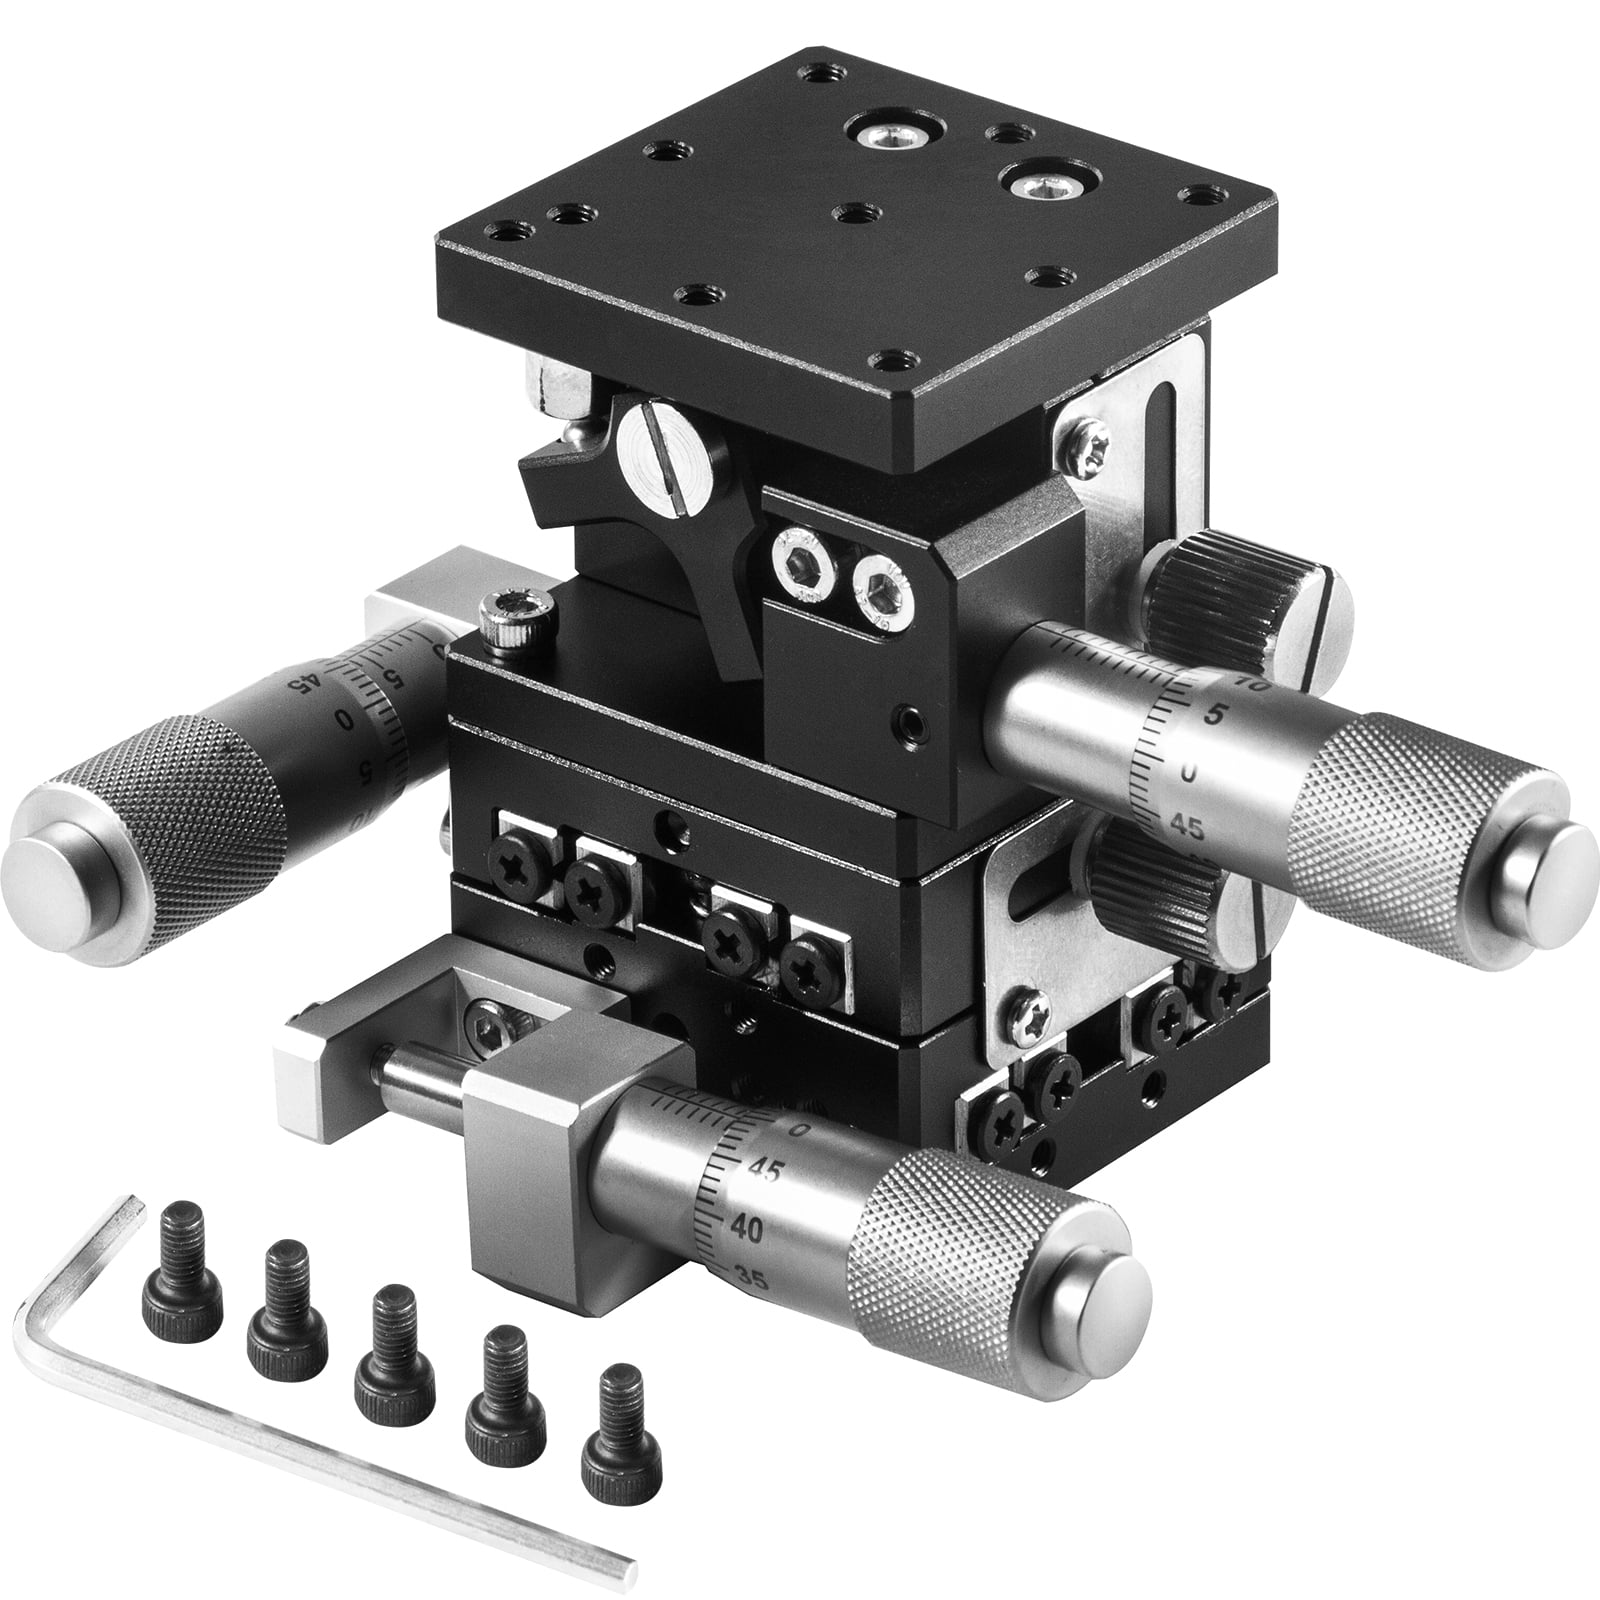 X-Axis Micrometer Manual Fine-tuning Cross Roller  Linear Stage Durable 